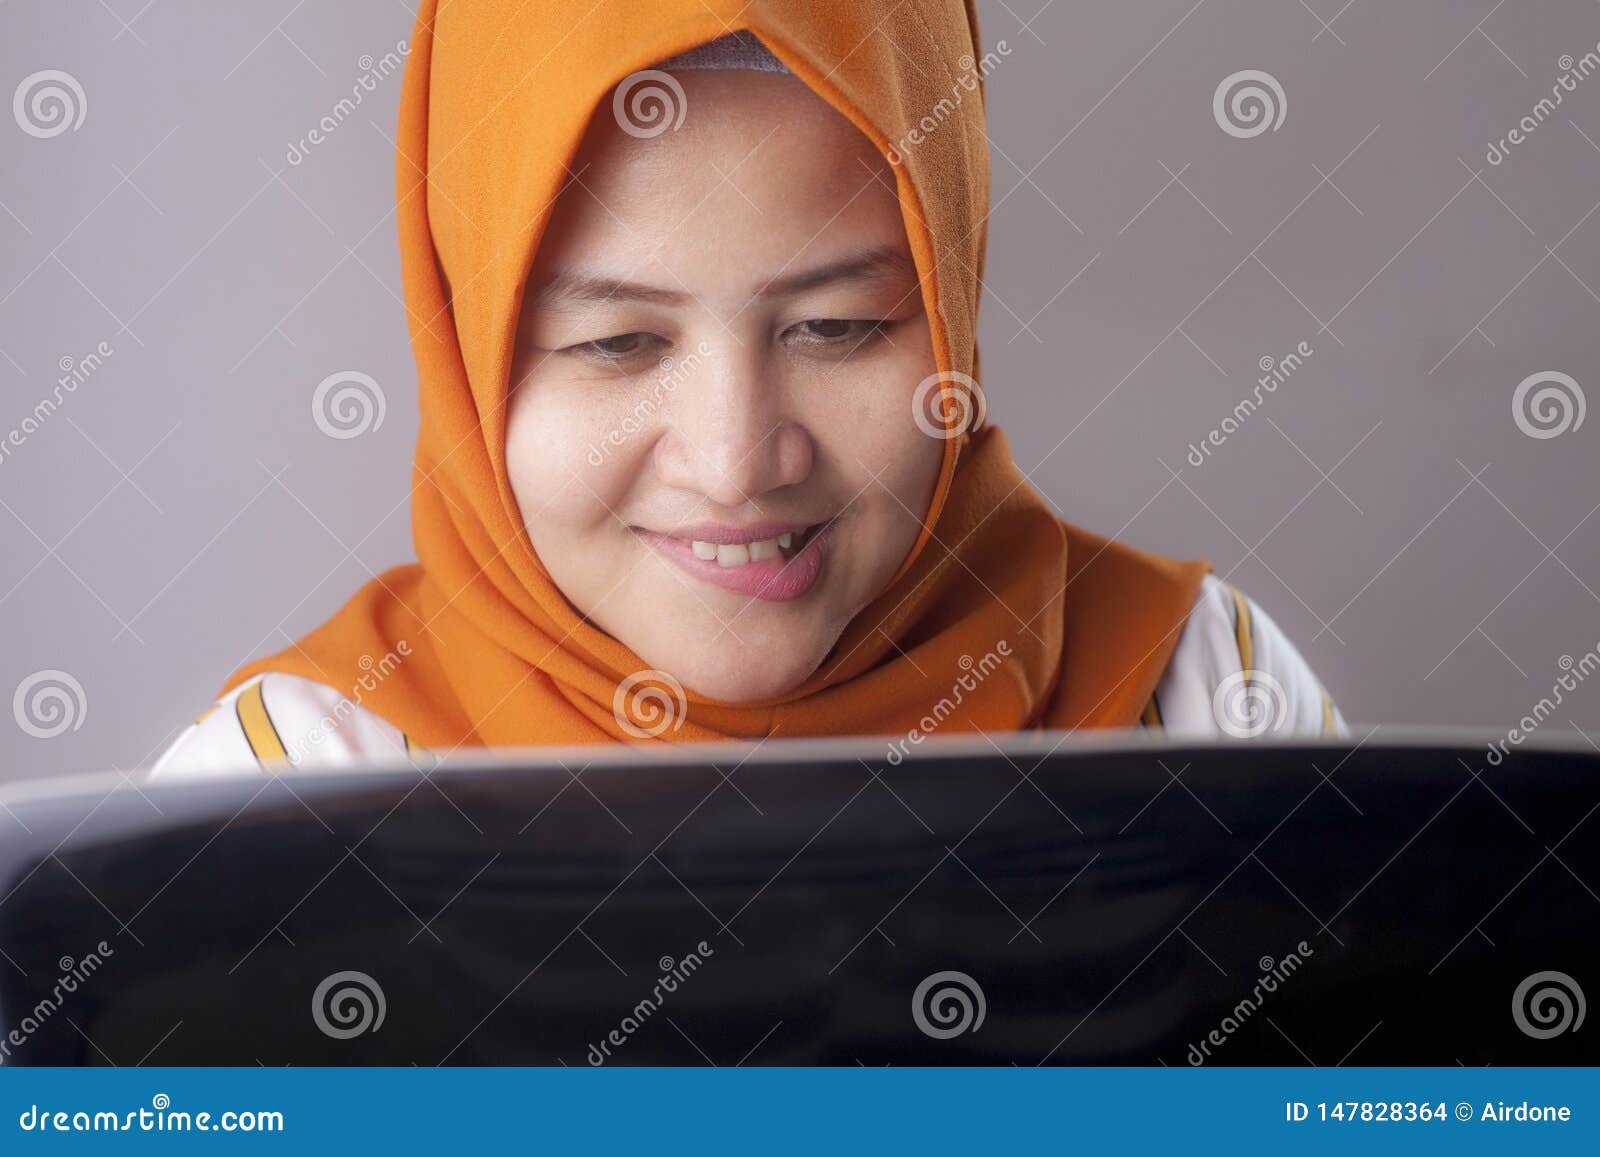 Woman With Naughty Expression Looking At Laptop Stock Photo ...